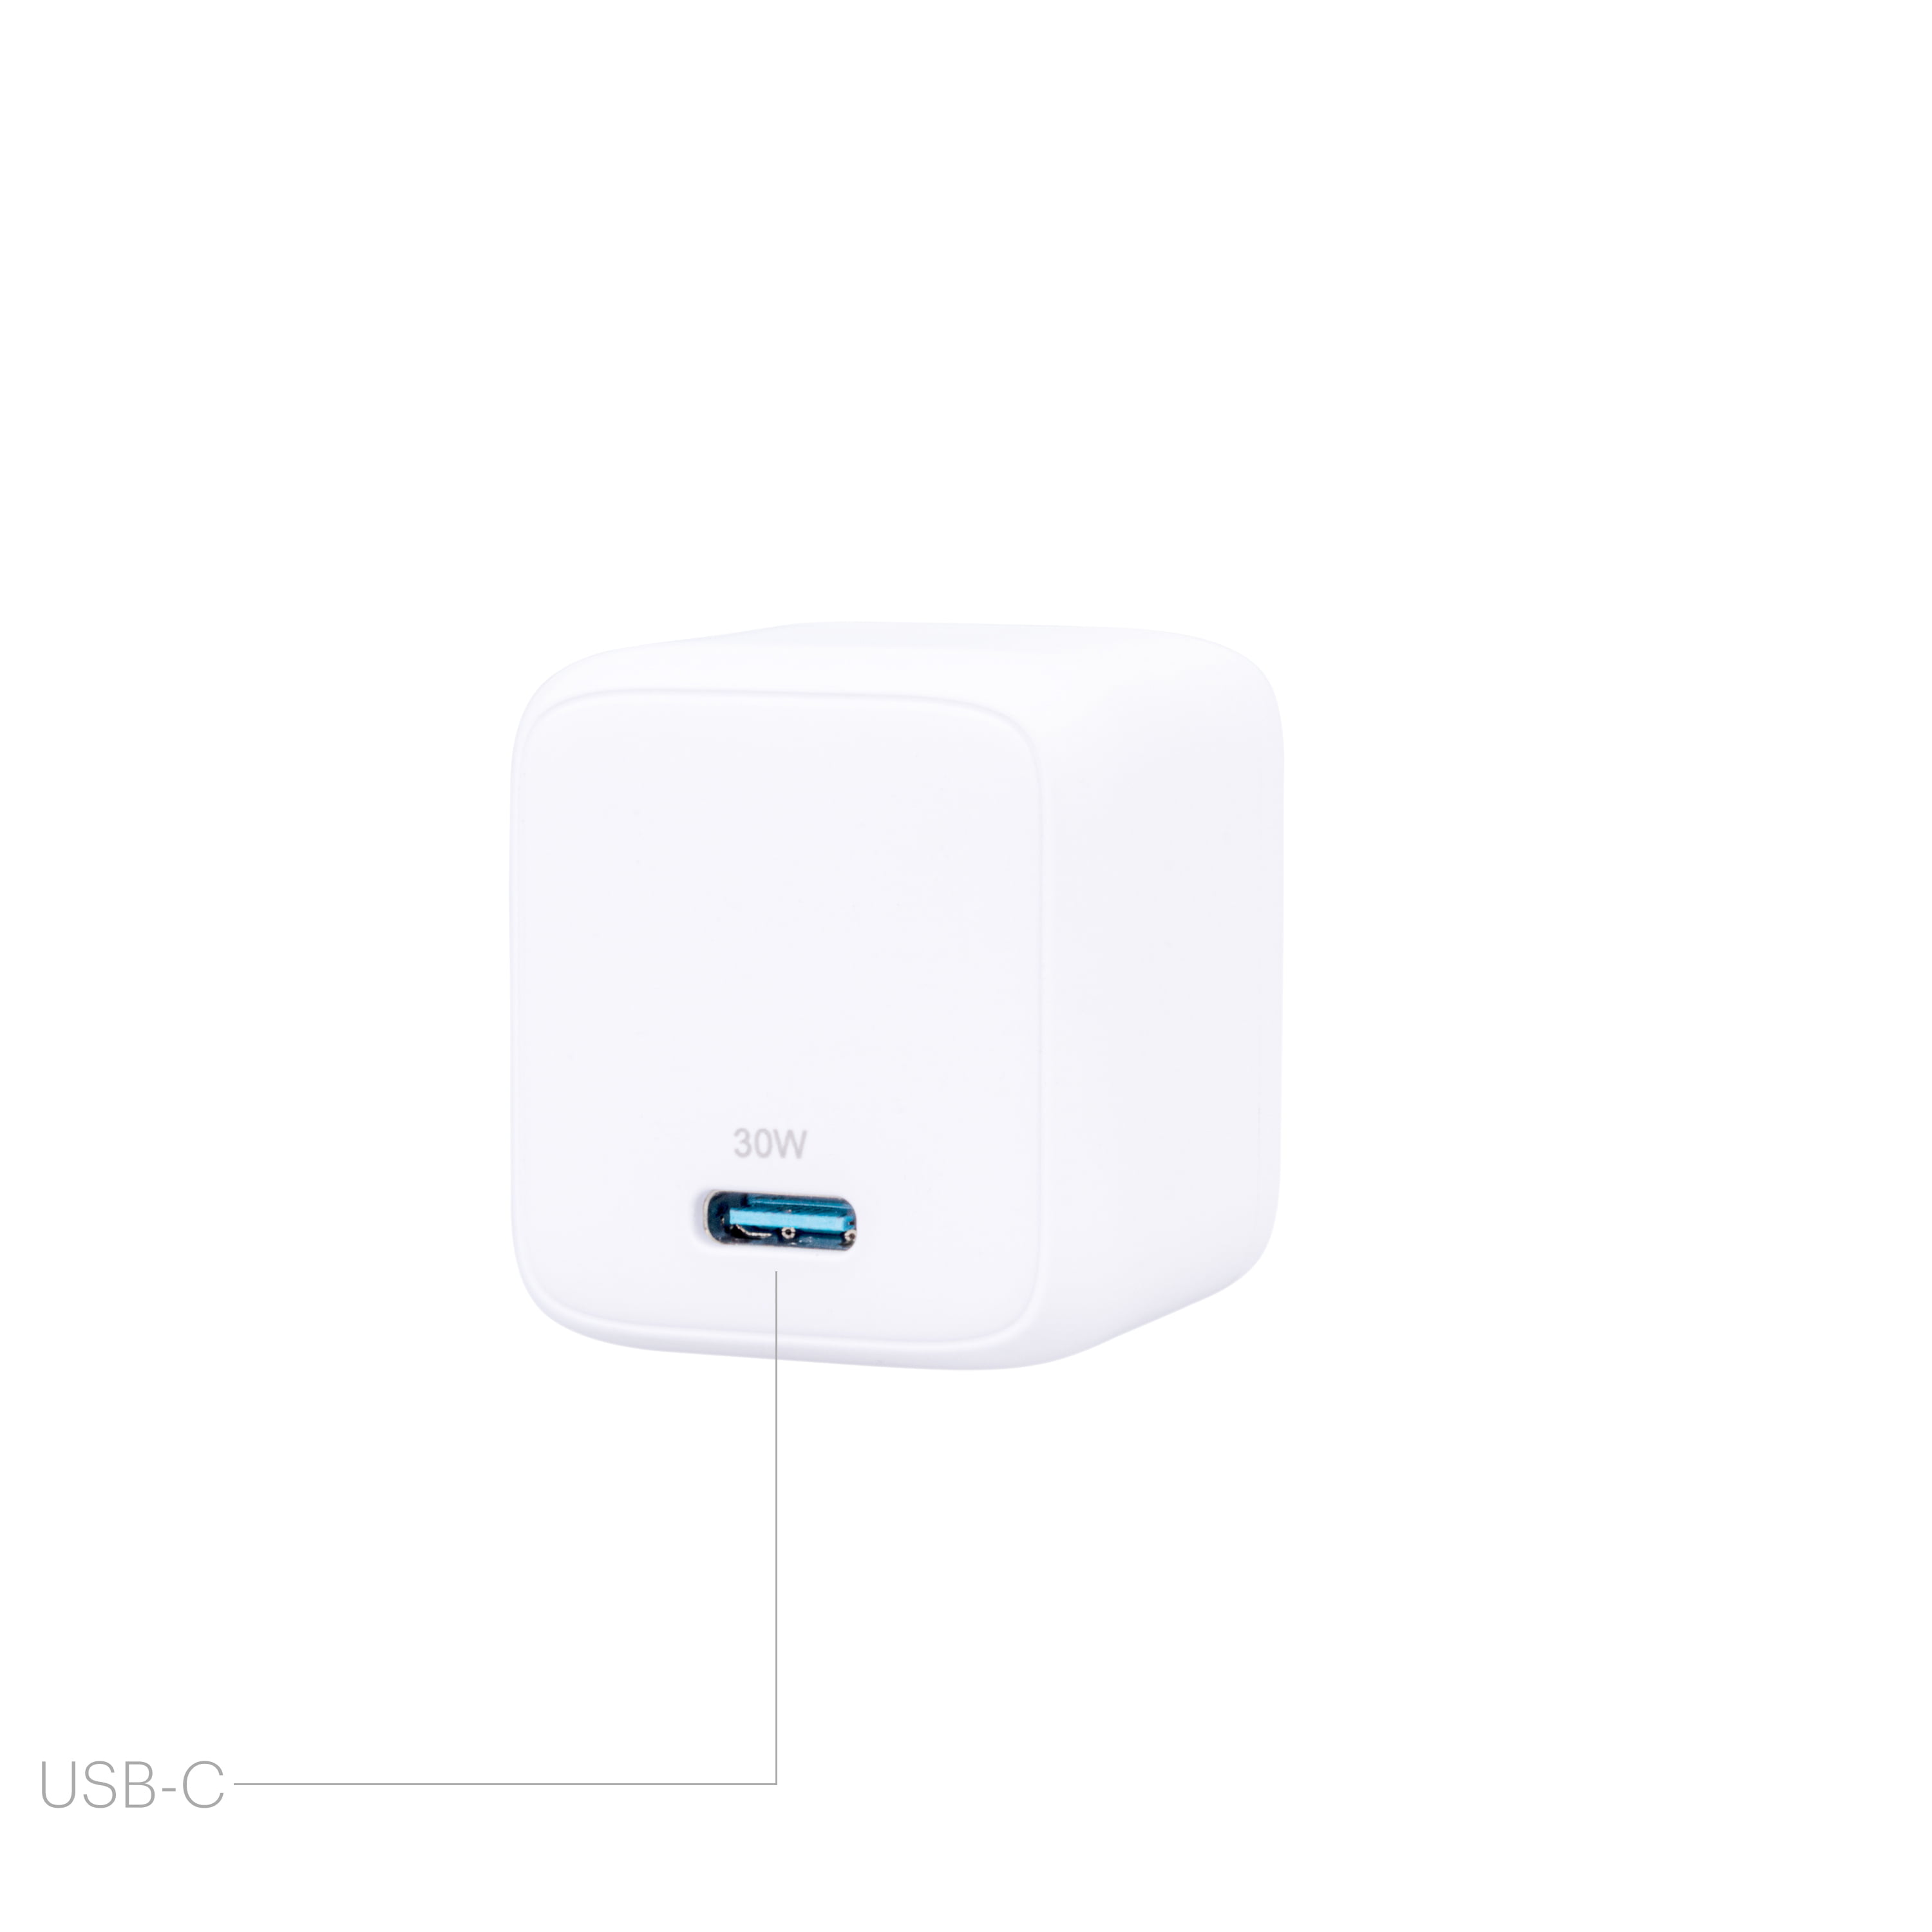 onn. 30W USB-C Wall Charger with Power Delivery, White, for iPhone models (13/12/11/SE/XS/XR/8 series), Samsung, Sony, and LG smartphone models, foldable plug for on the go.